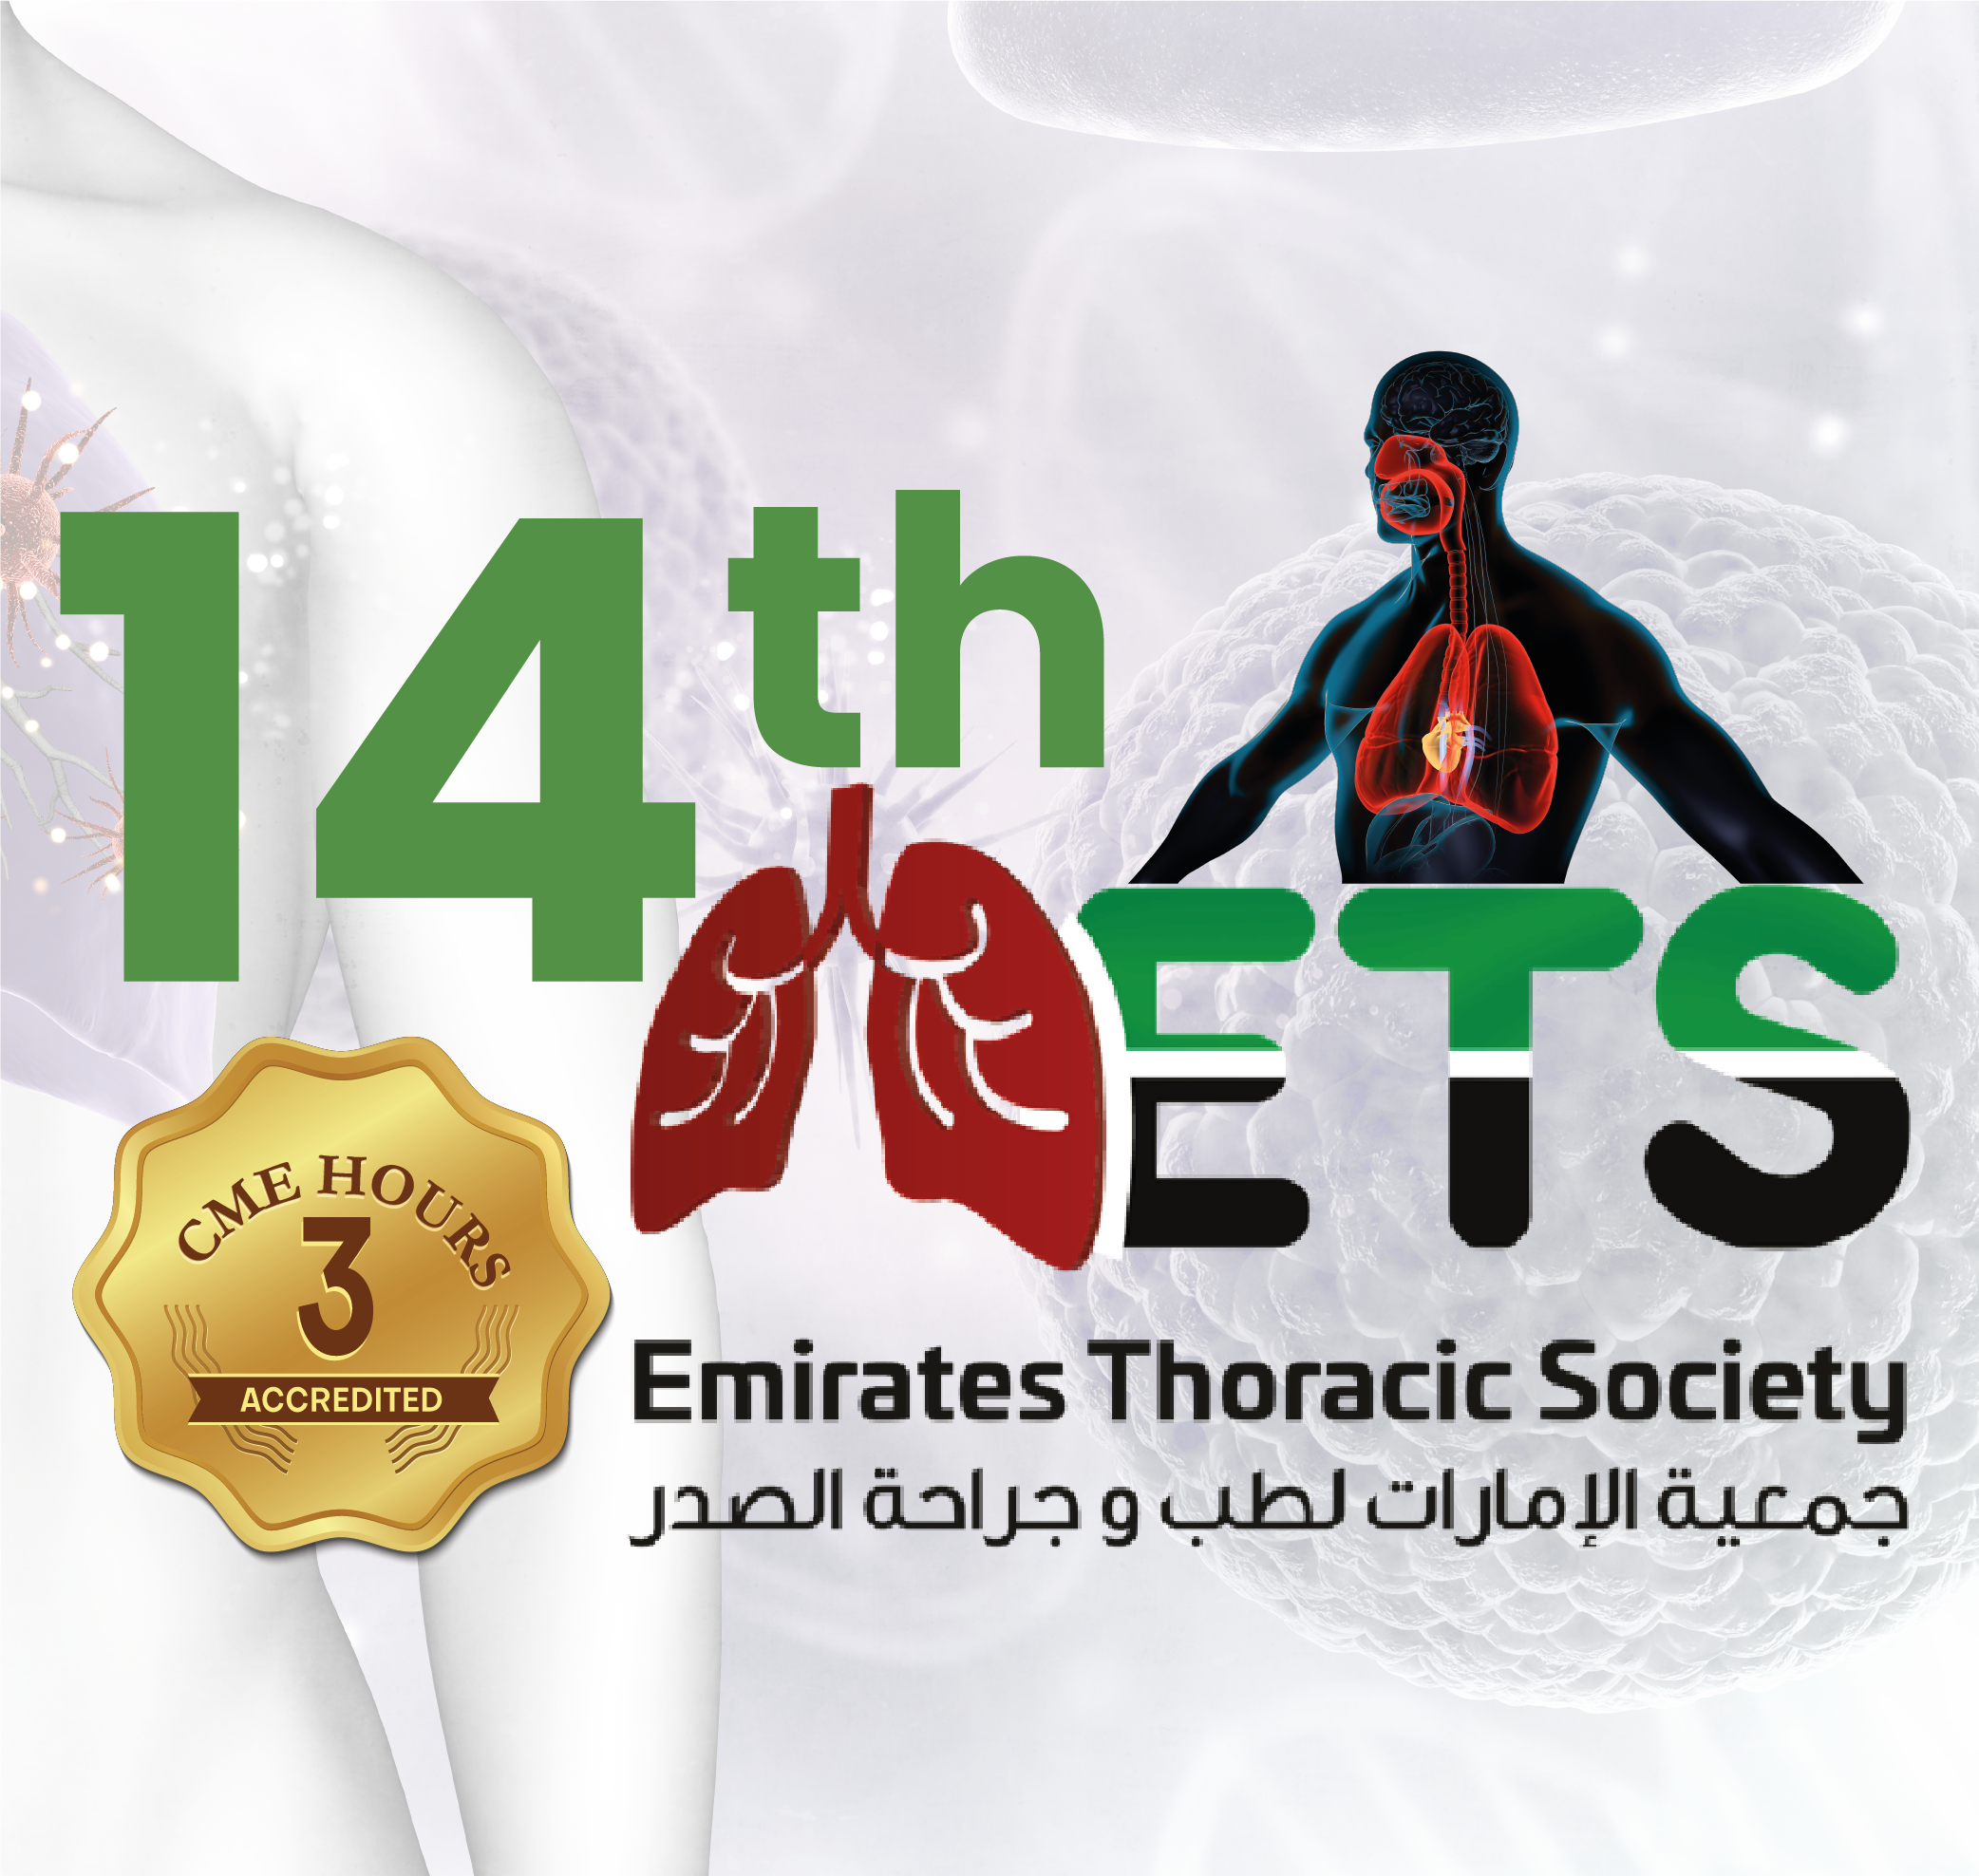 14th ETS Scientific Meeting: Thoracic Surgery